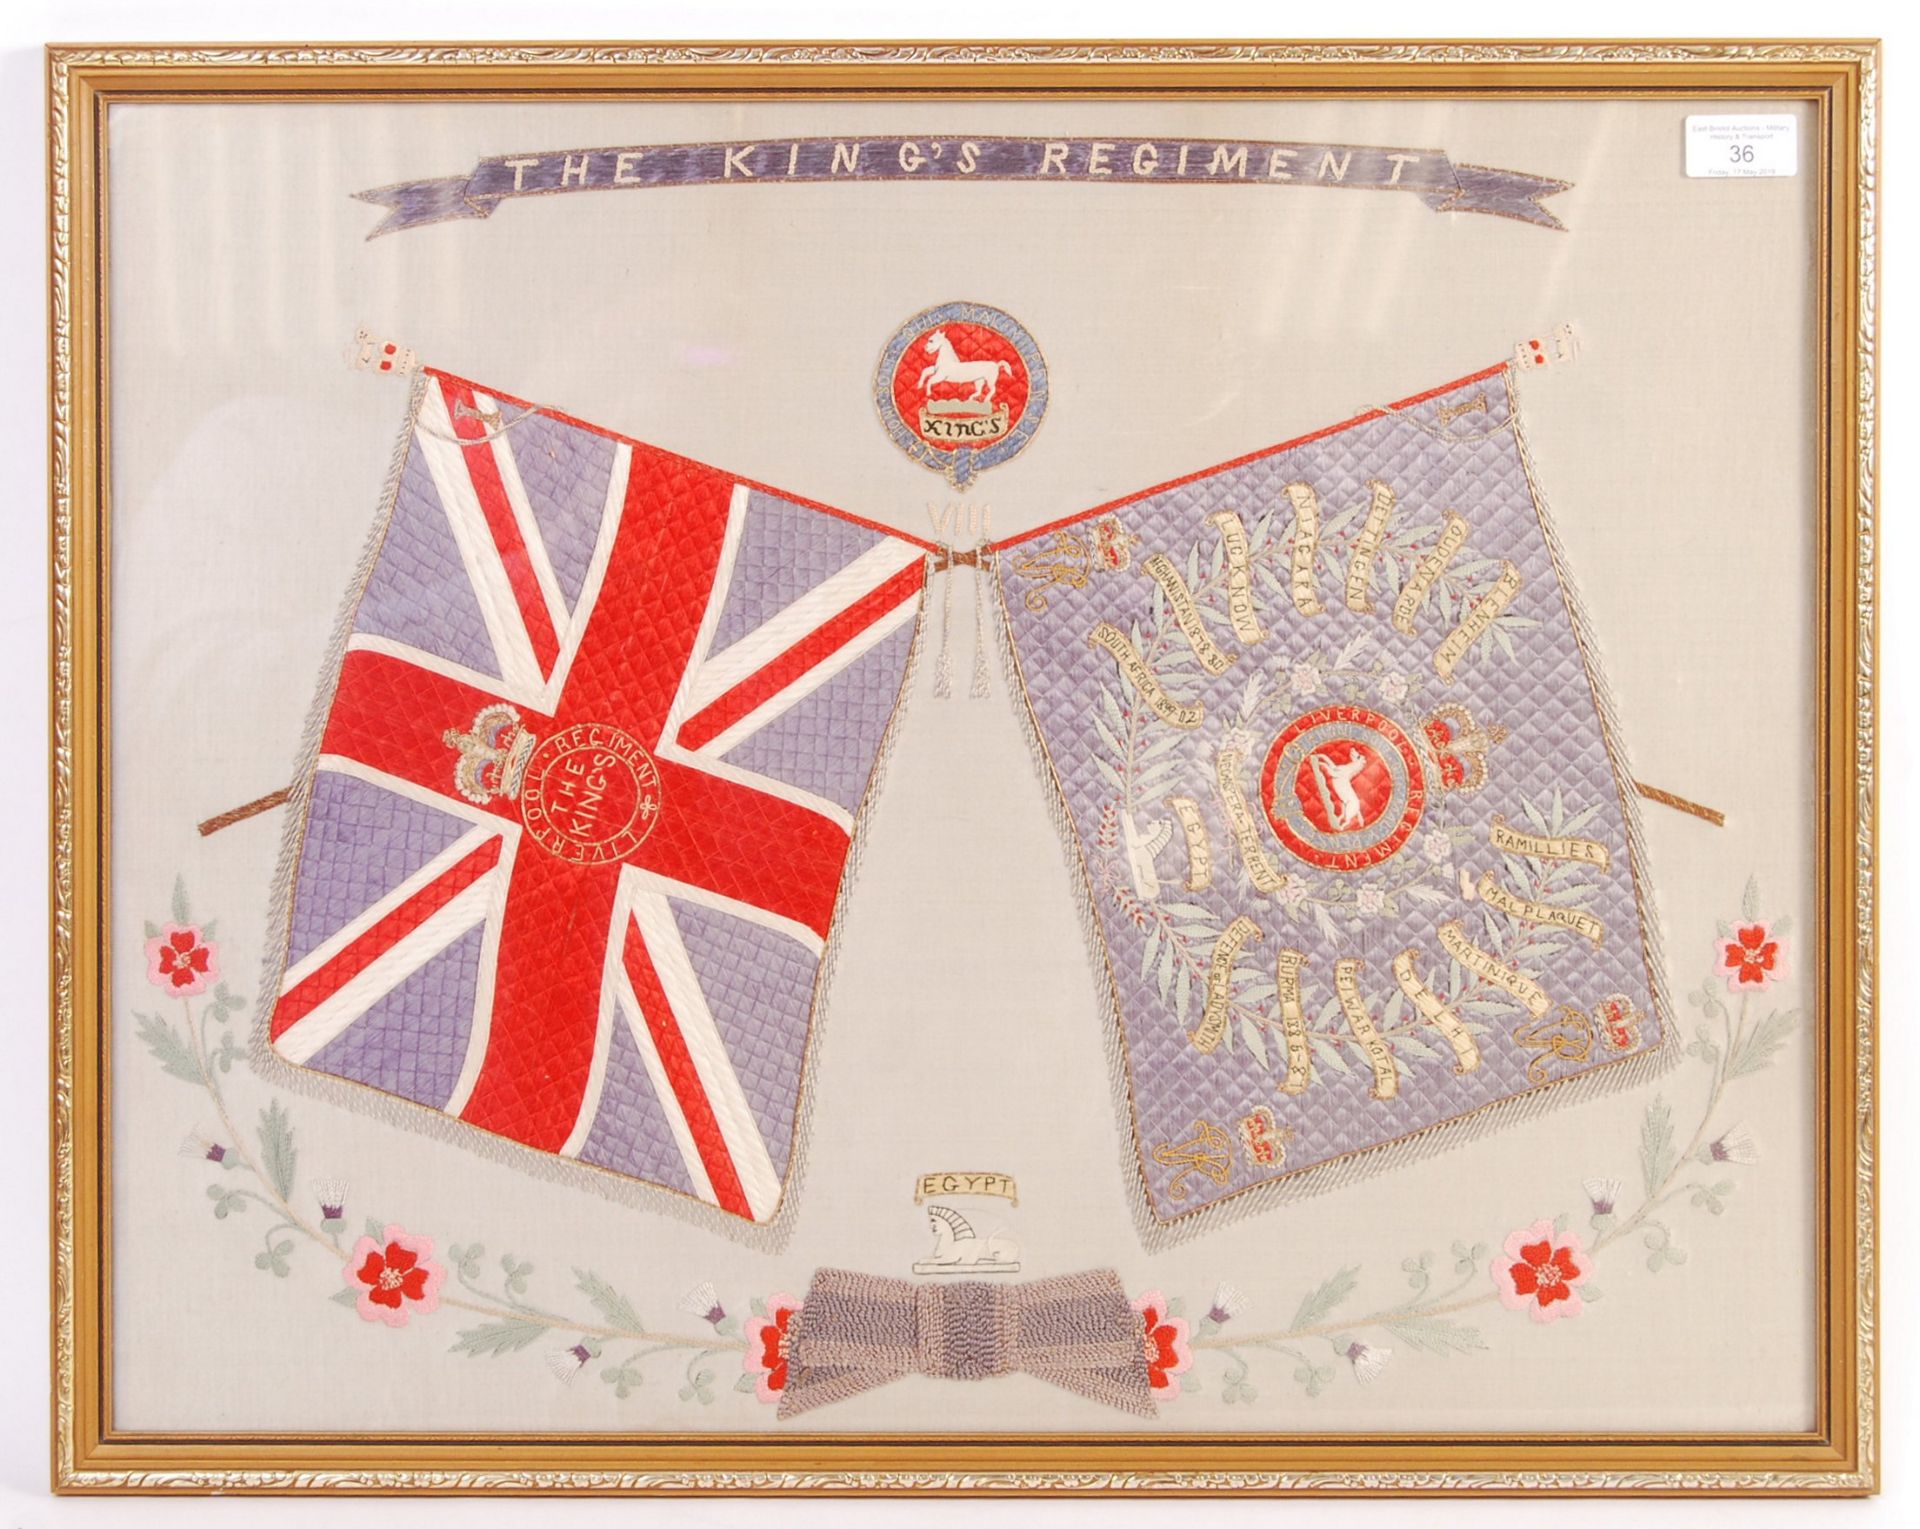 THE KING'S REGIMENT HAND MADE SILK COMMEMORATIVE PANEL